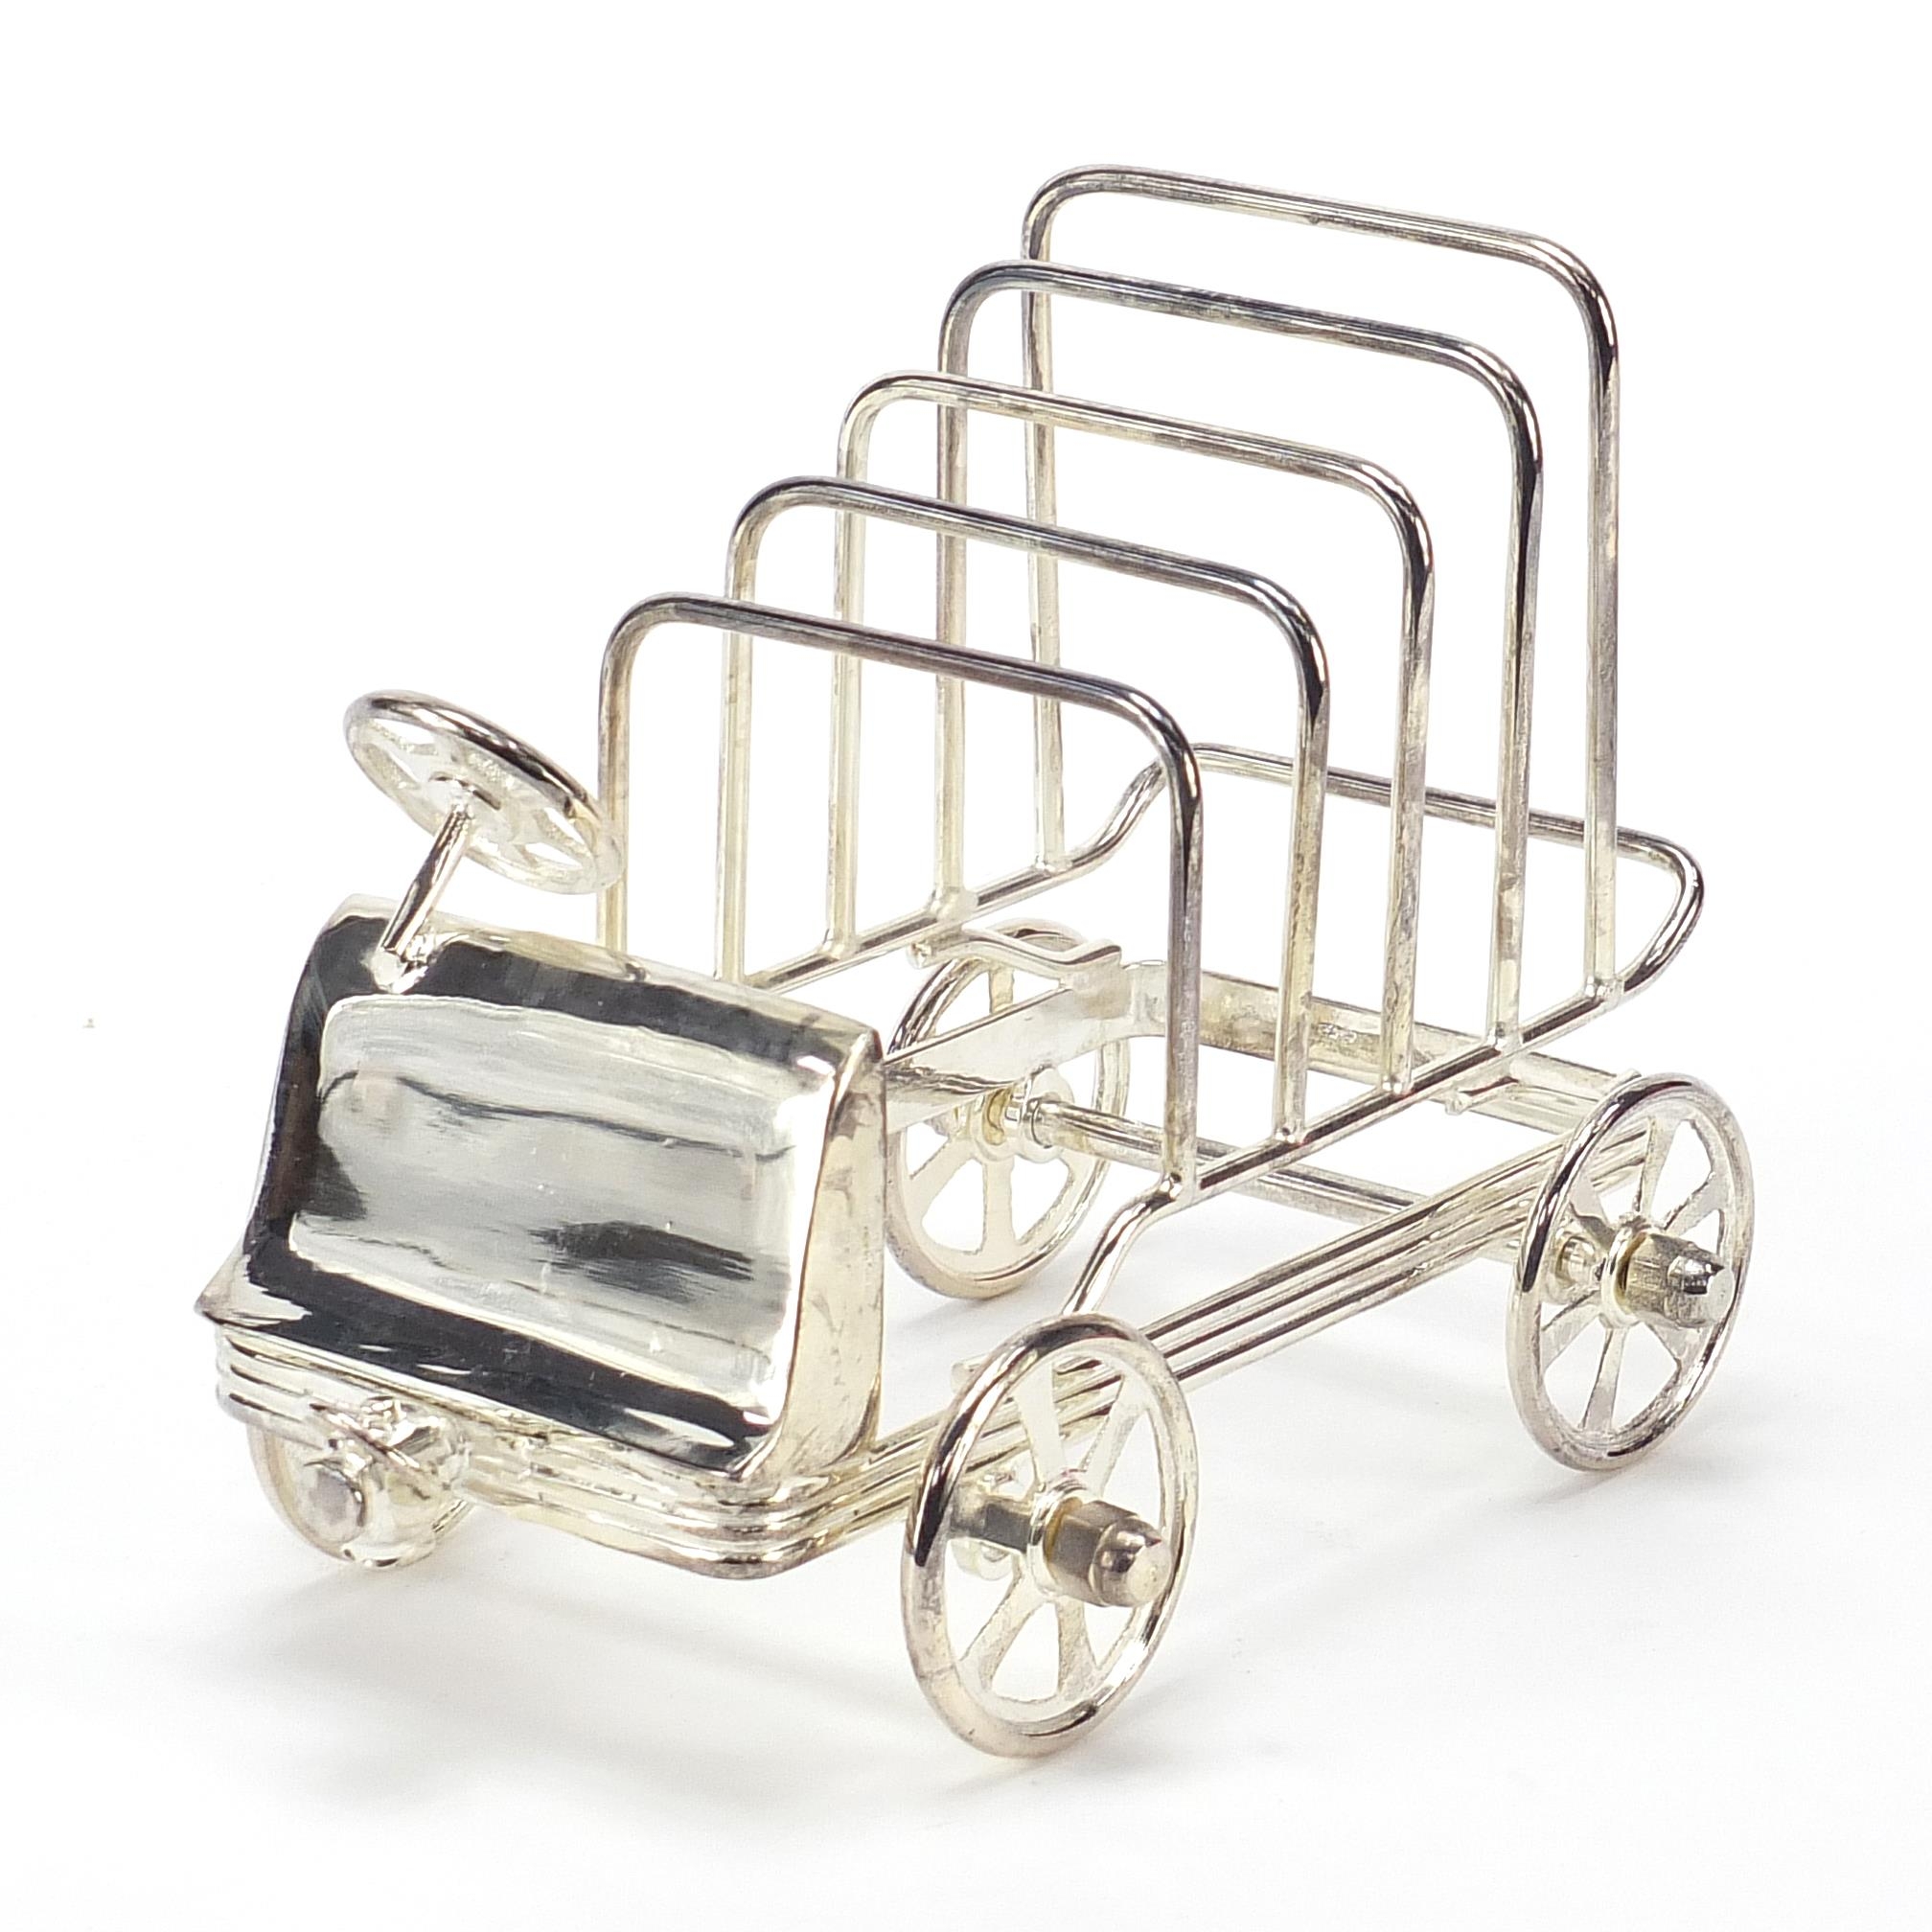 Novelty silver plated five slice toast rack in the form of a car with rotating wheels, 15.5cm in